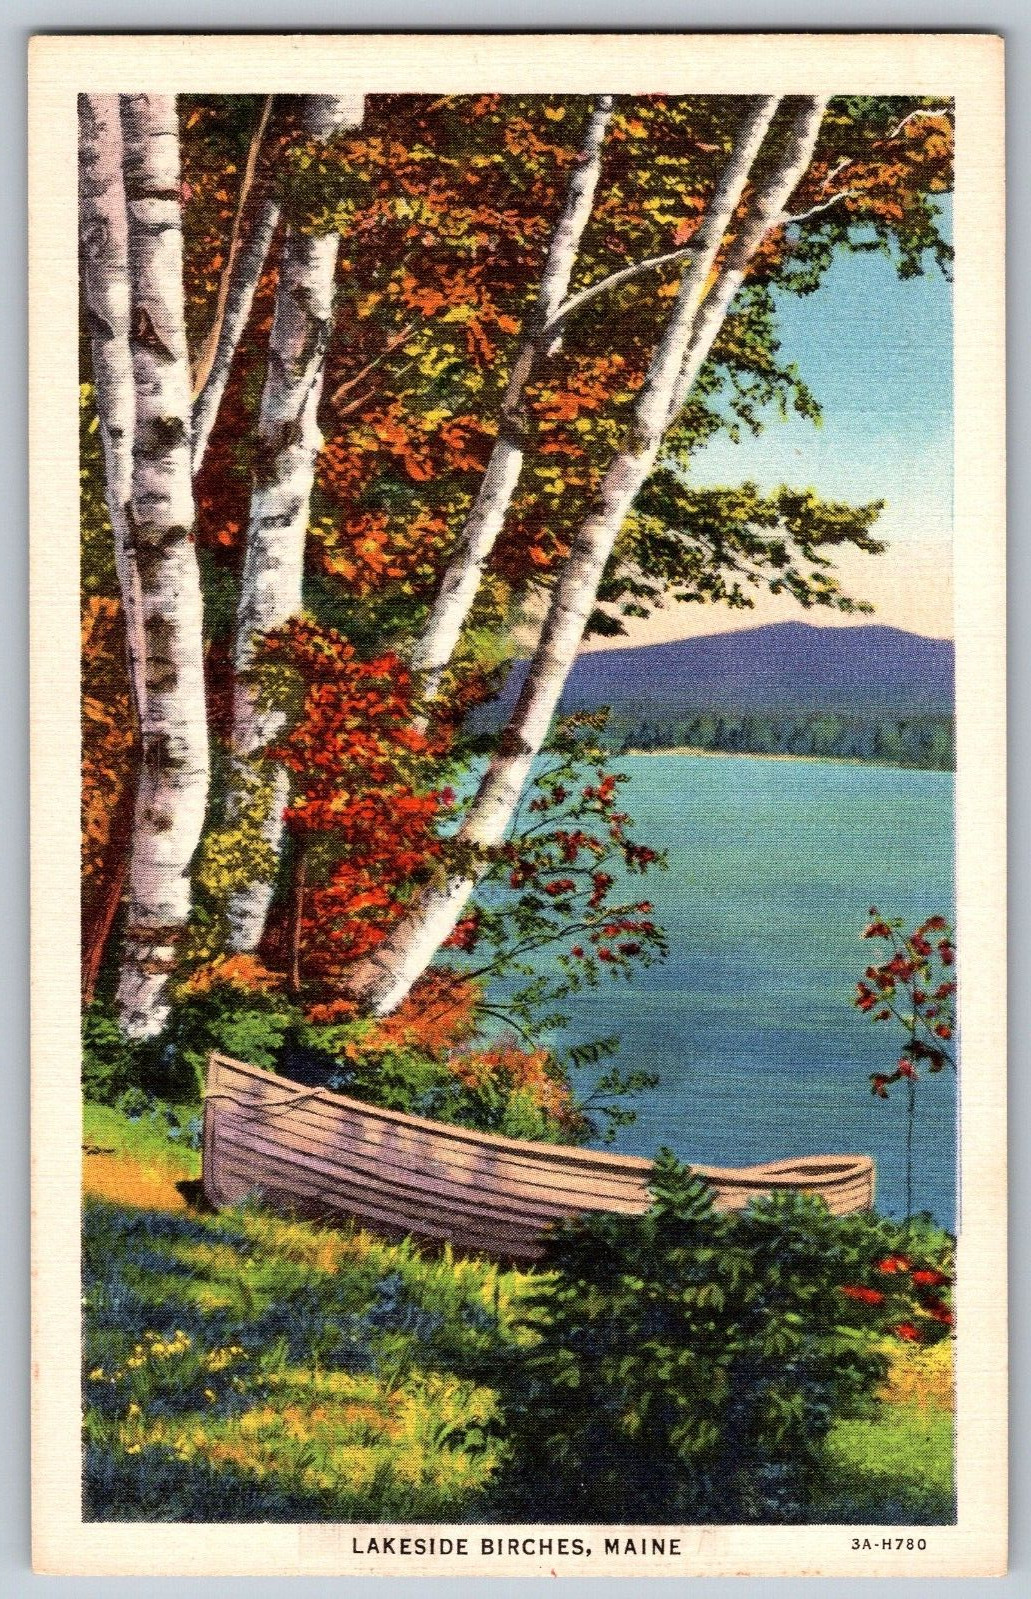 Maine ME - Lakeside Birches - Canoeing on Lake - Vintage Postcard - Unposted